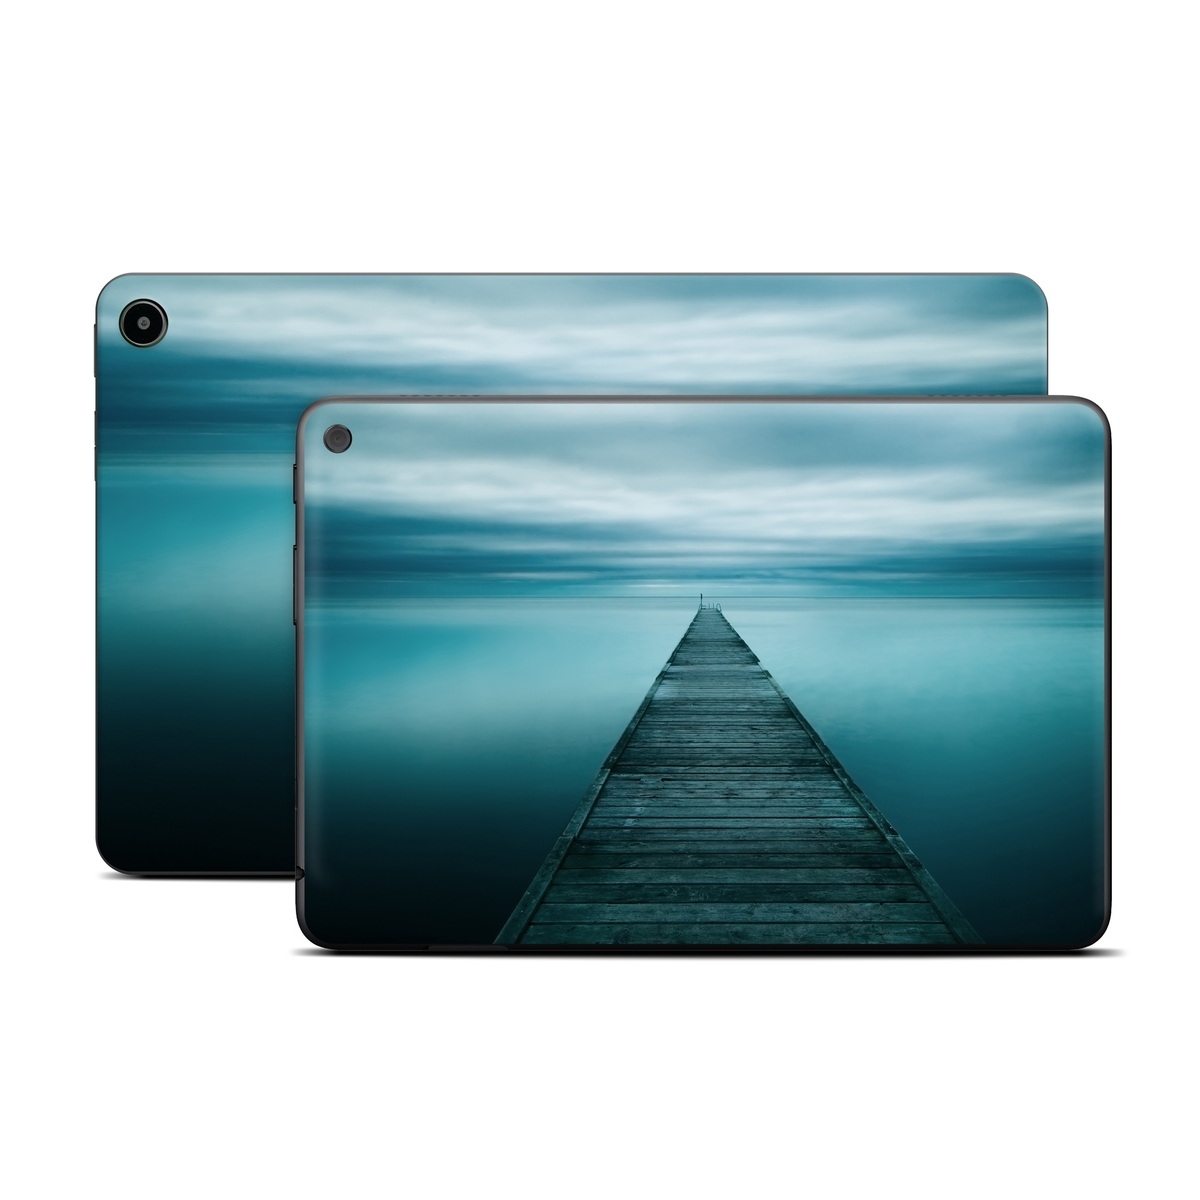 Amazon Fire Tablet Series Skin Skin design of Sea, Water, Horizon, Sky, Blue, Ocean, Daytime, Calm, Fixed link, Symmetry, with black, blue, gray colors